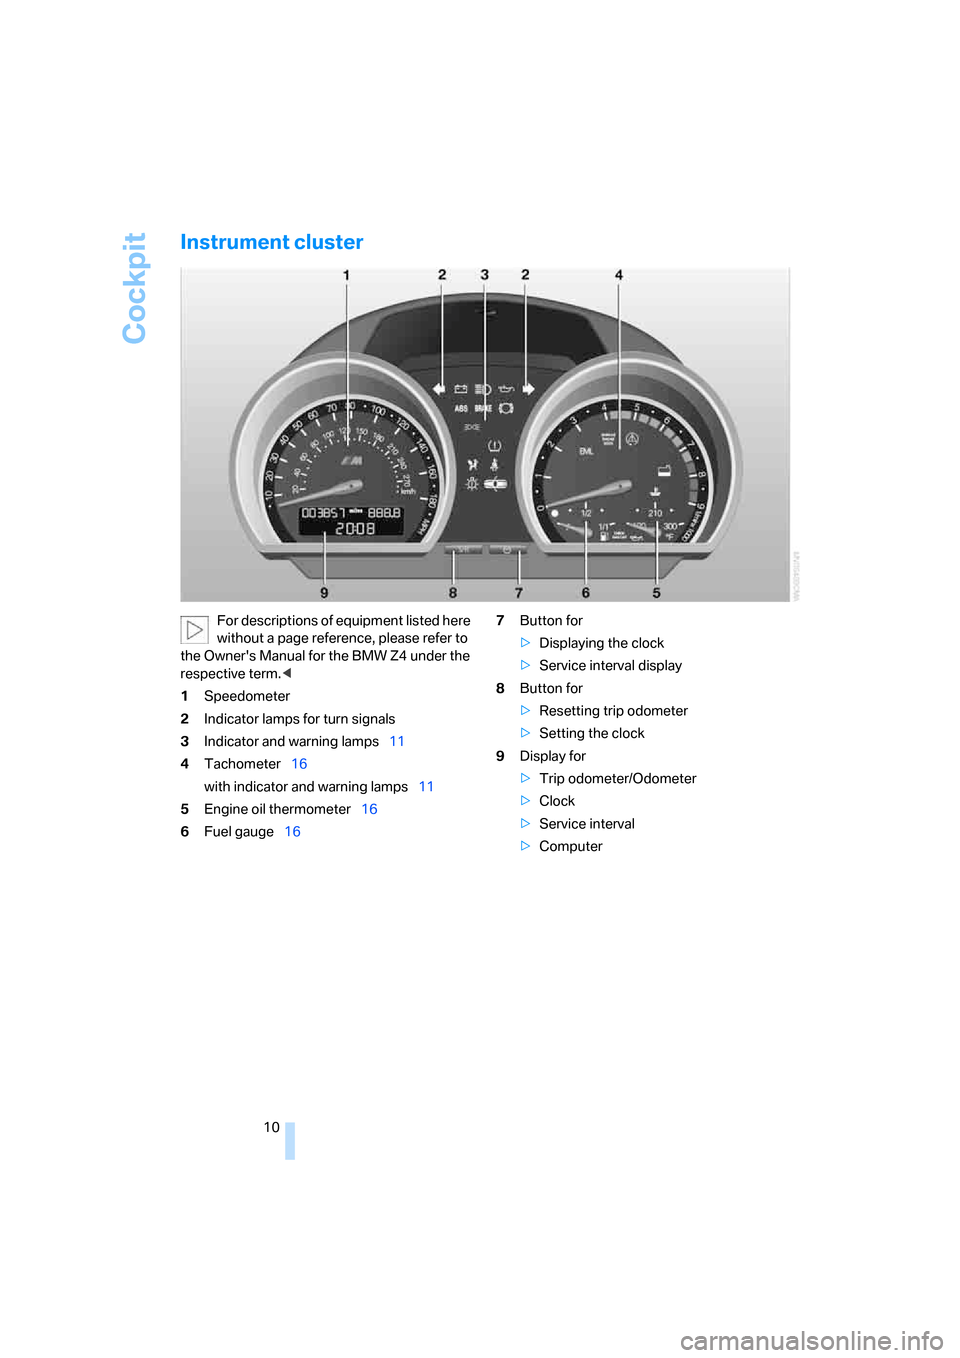 BMW Z4M ROADSTER 2006 E85 Owners Manual Cockpit
10
Instrument cluster
For descriptions of equipment listed here 
without a page reference, please refer to 
the Owners Manual for the BMW Z4 under the 
respective term.<
1Speedometer
2Indicat